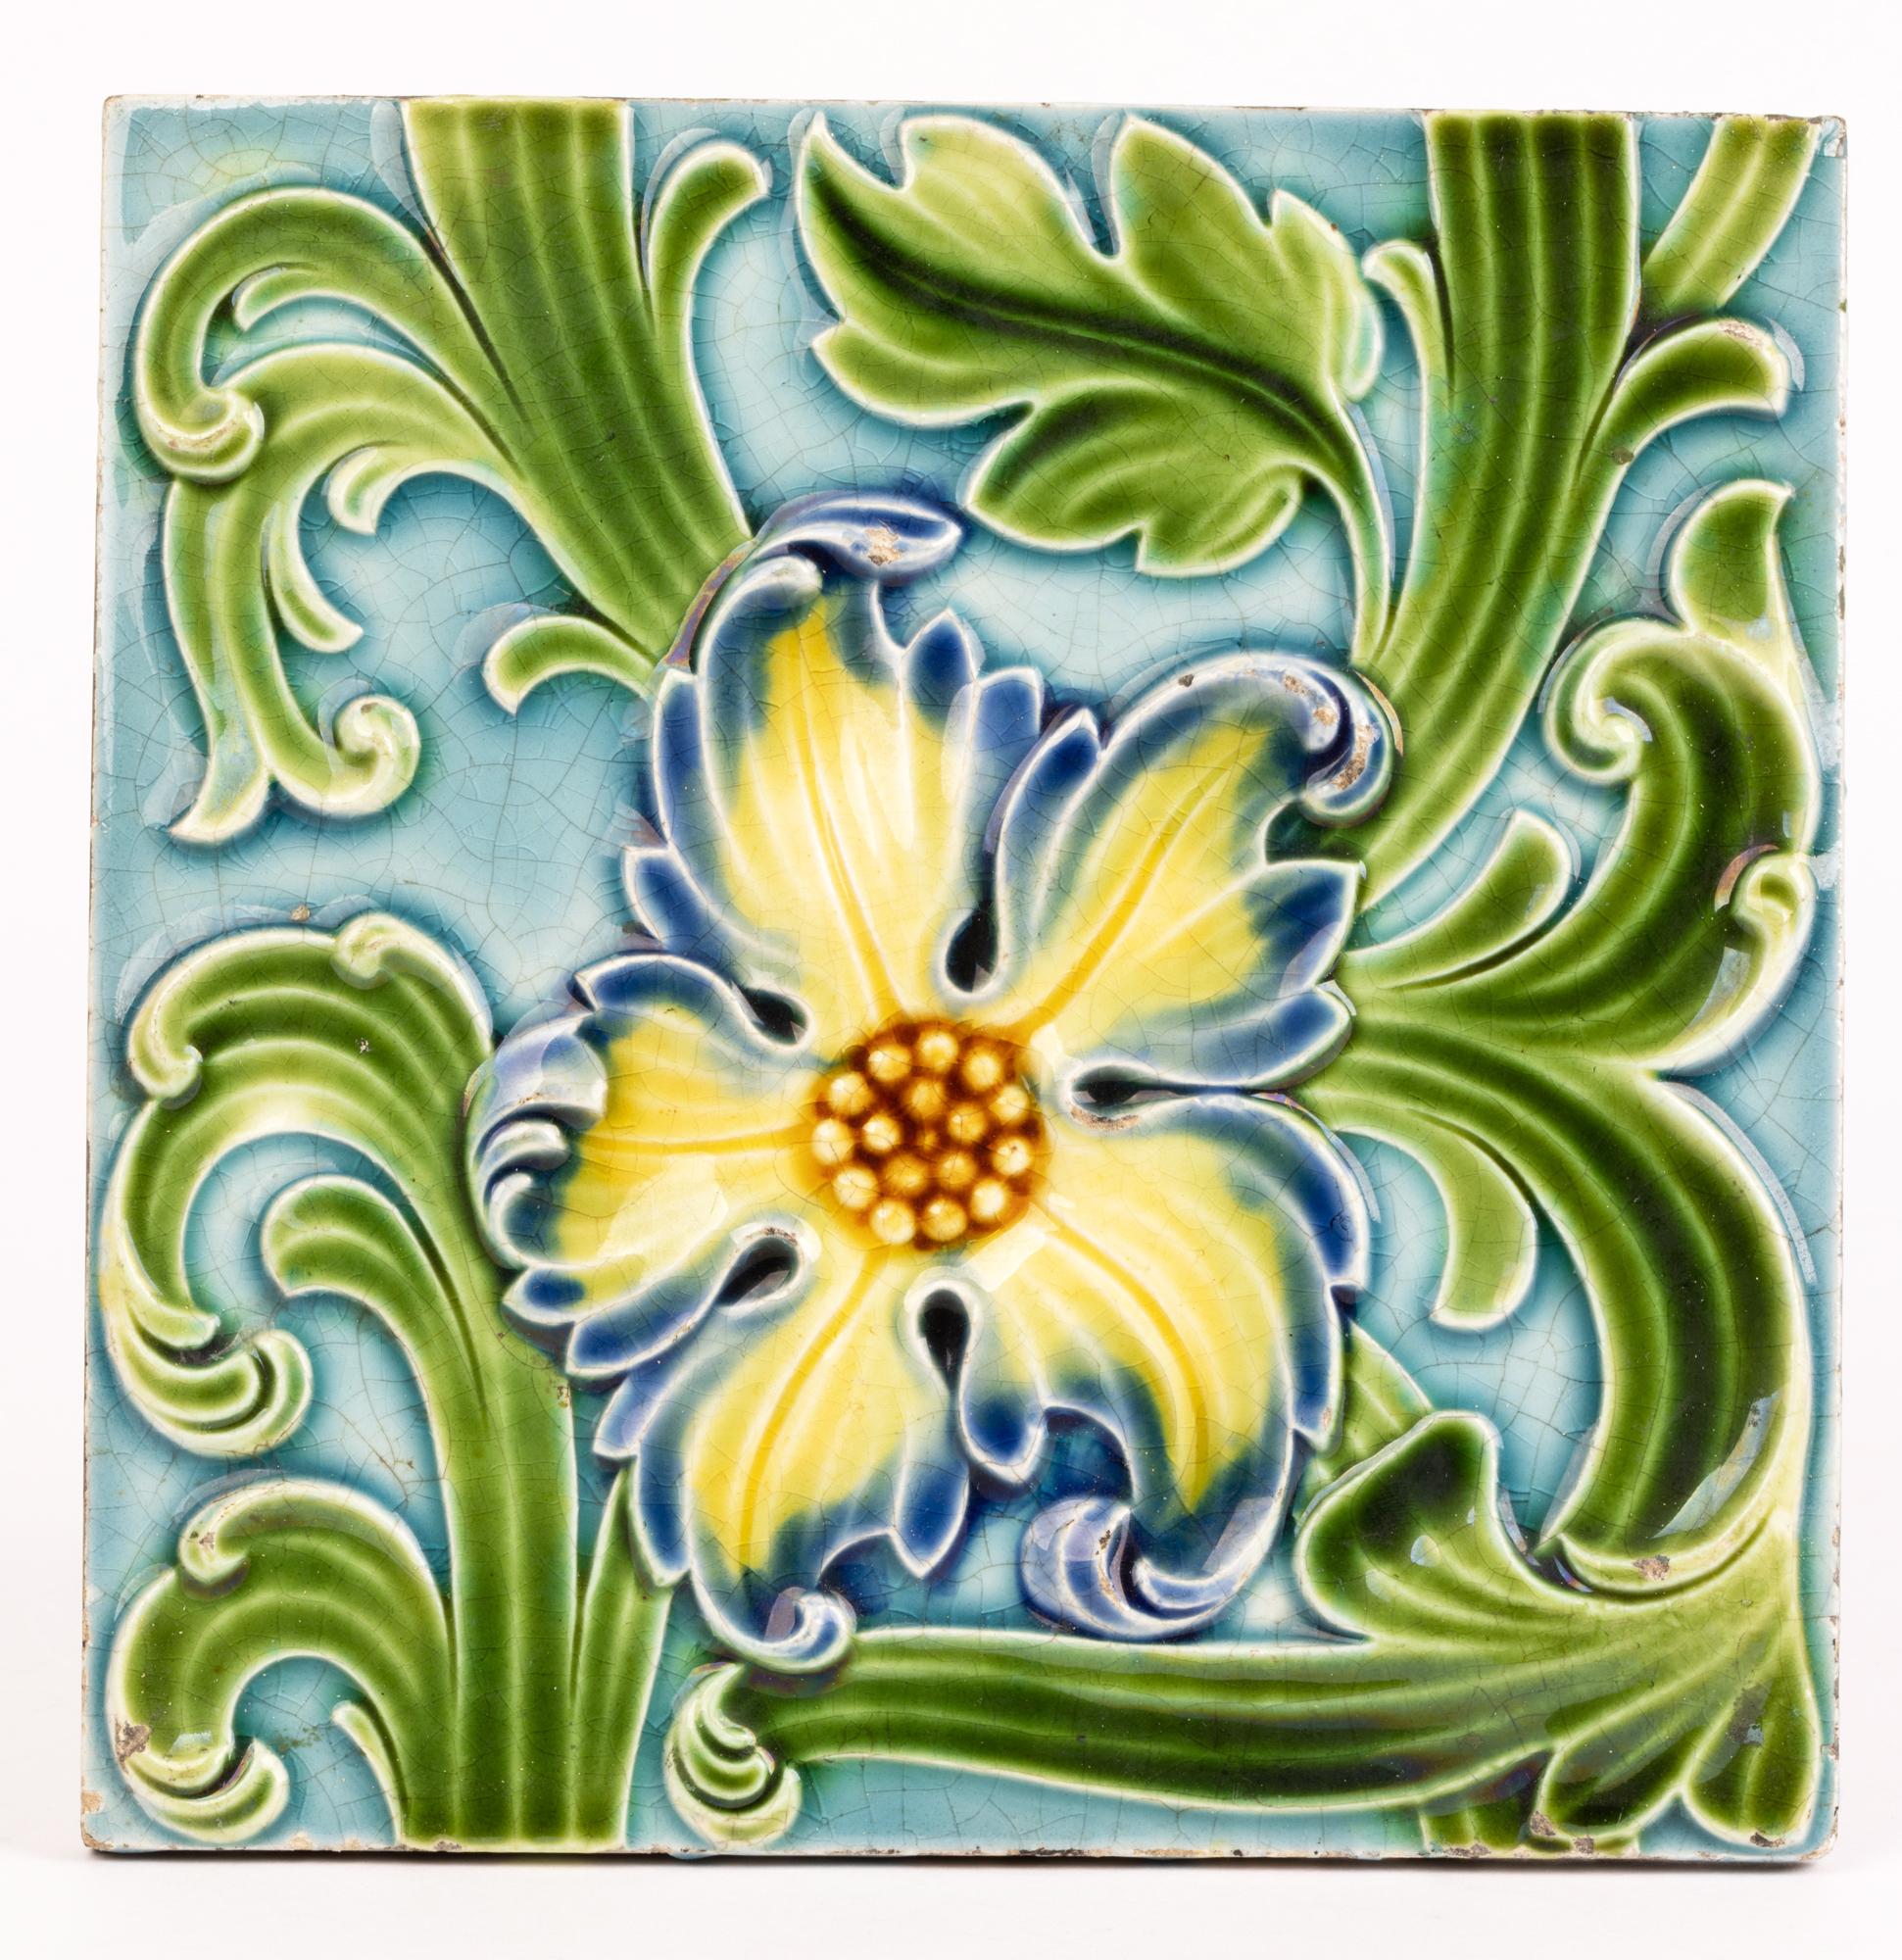 A large and impressive antique Wedgwood majolica tile decorated with a floral design dating from the 19th century. The tile of square shape is molded in relief with a central floral bloom set amidst green stems. The tile is hand decorated in colored